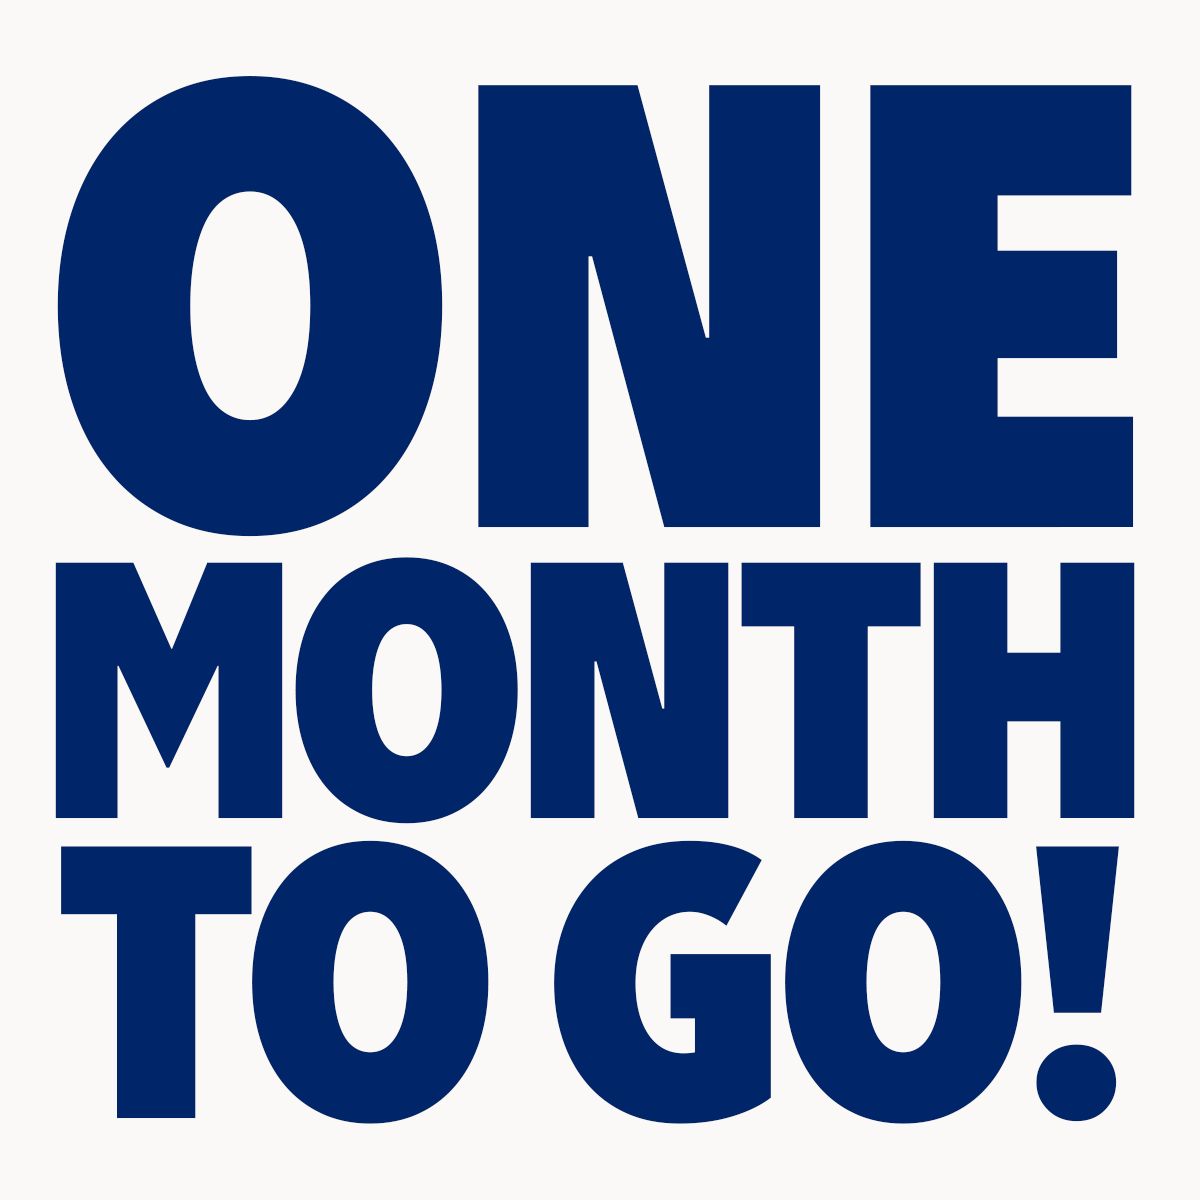 The final stretch is here! One month until we lace up for the #UnitedNYCHalf! 🏅 Leave a comment below and let us know if we'll be lucky enough to see you out there on March 17. ☘️